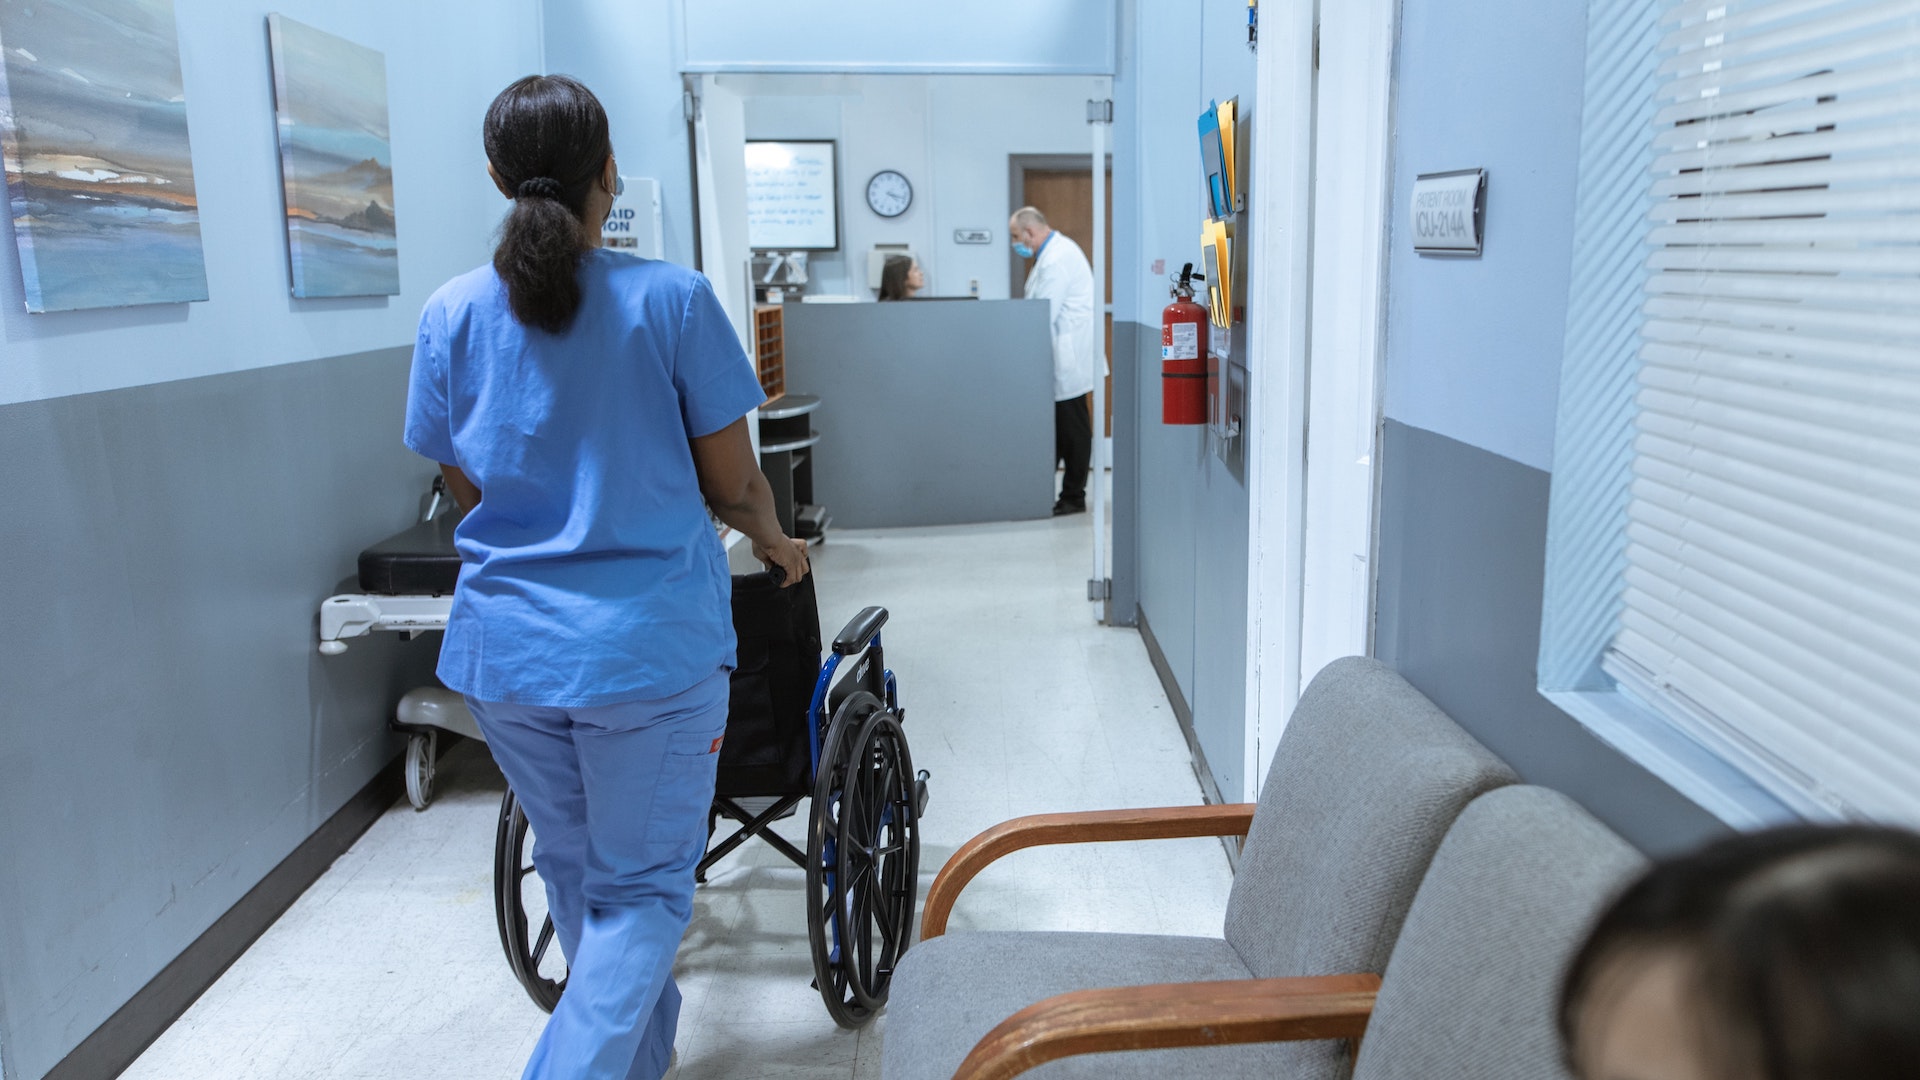 A nurse pushing an empty wheelchair down a hospital corridor, facing away from the corridor. Around 300,000 nurses did unpaid overtime during the pandemic.